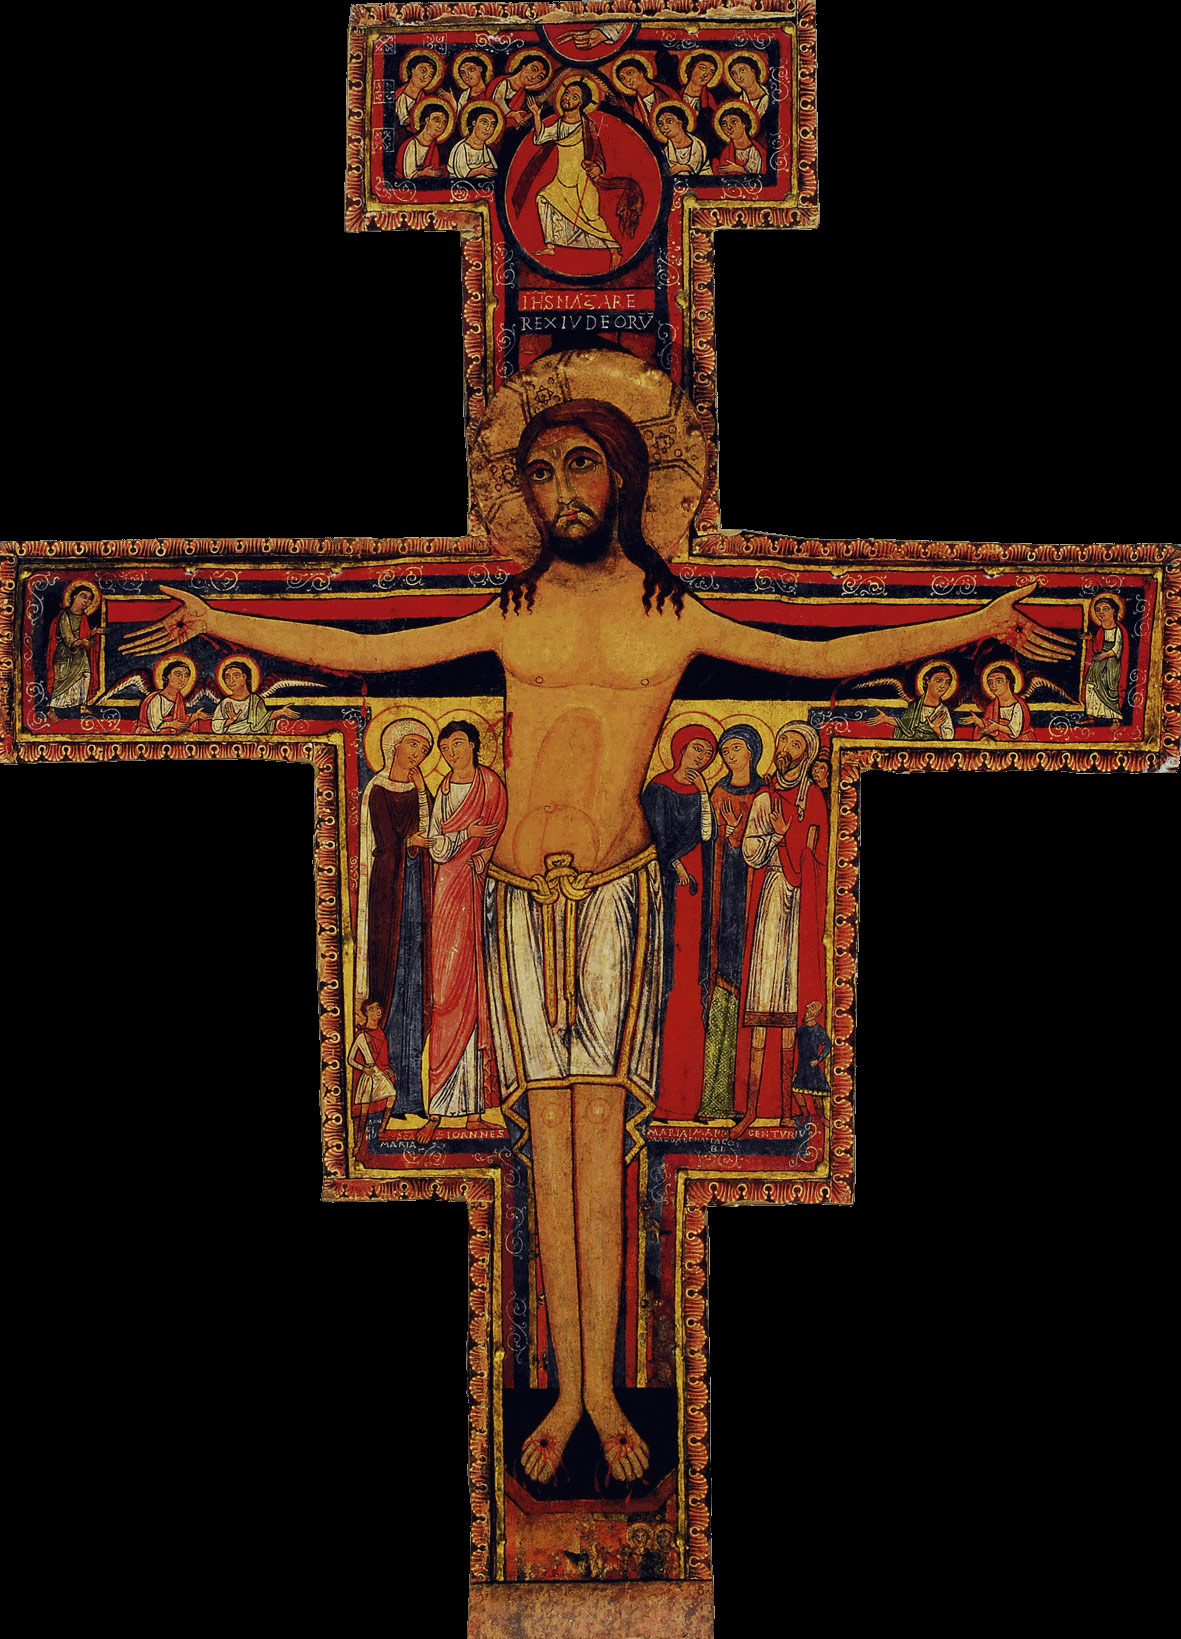 Author unknown, Crucifix of San Damiano (mid-12th century; canvas pasted on wood, 190 x 120 cm; Assisi, Basilica of Santa Chiara)